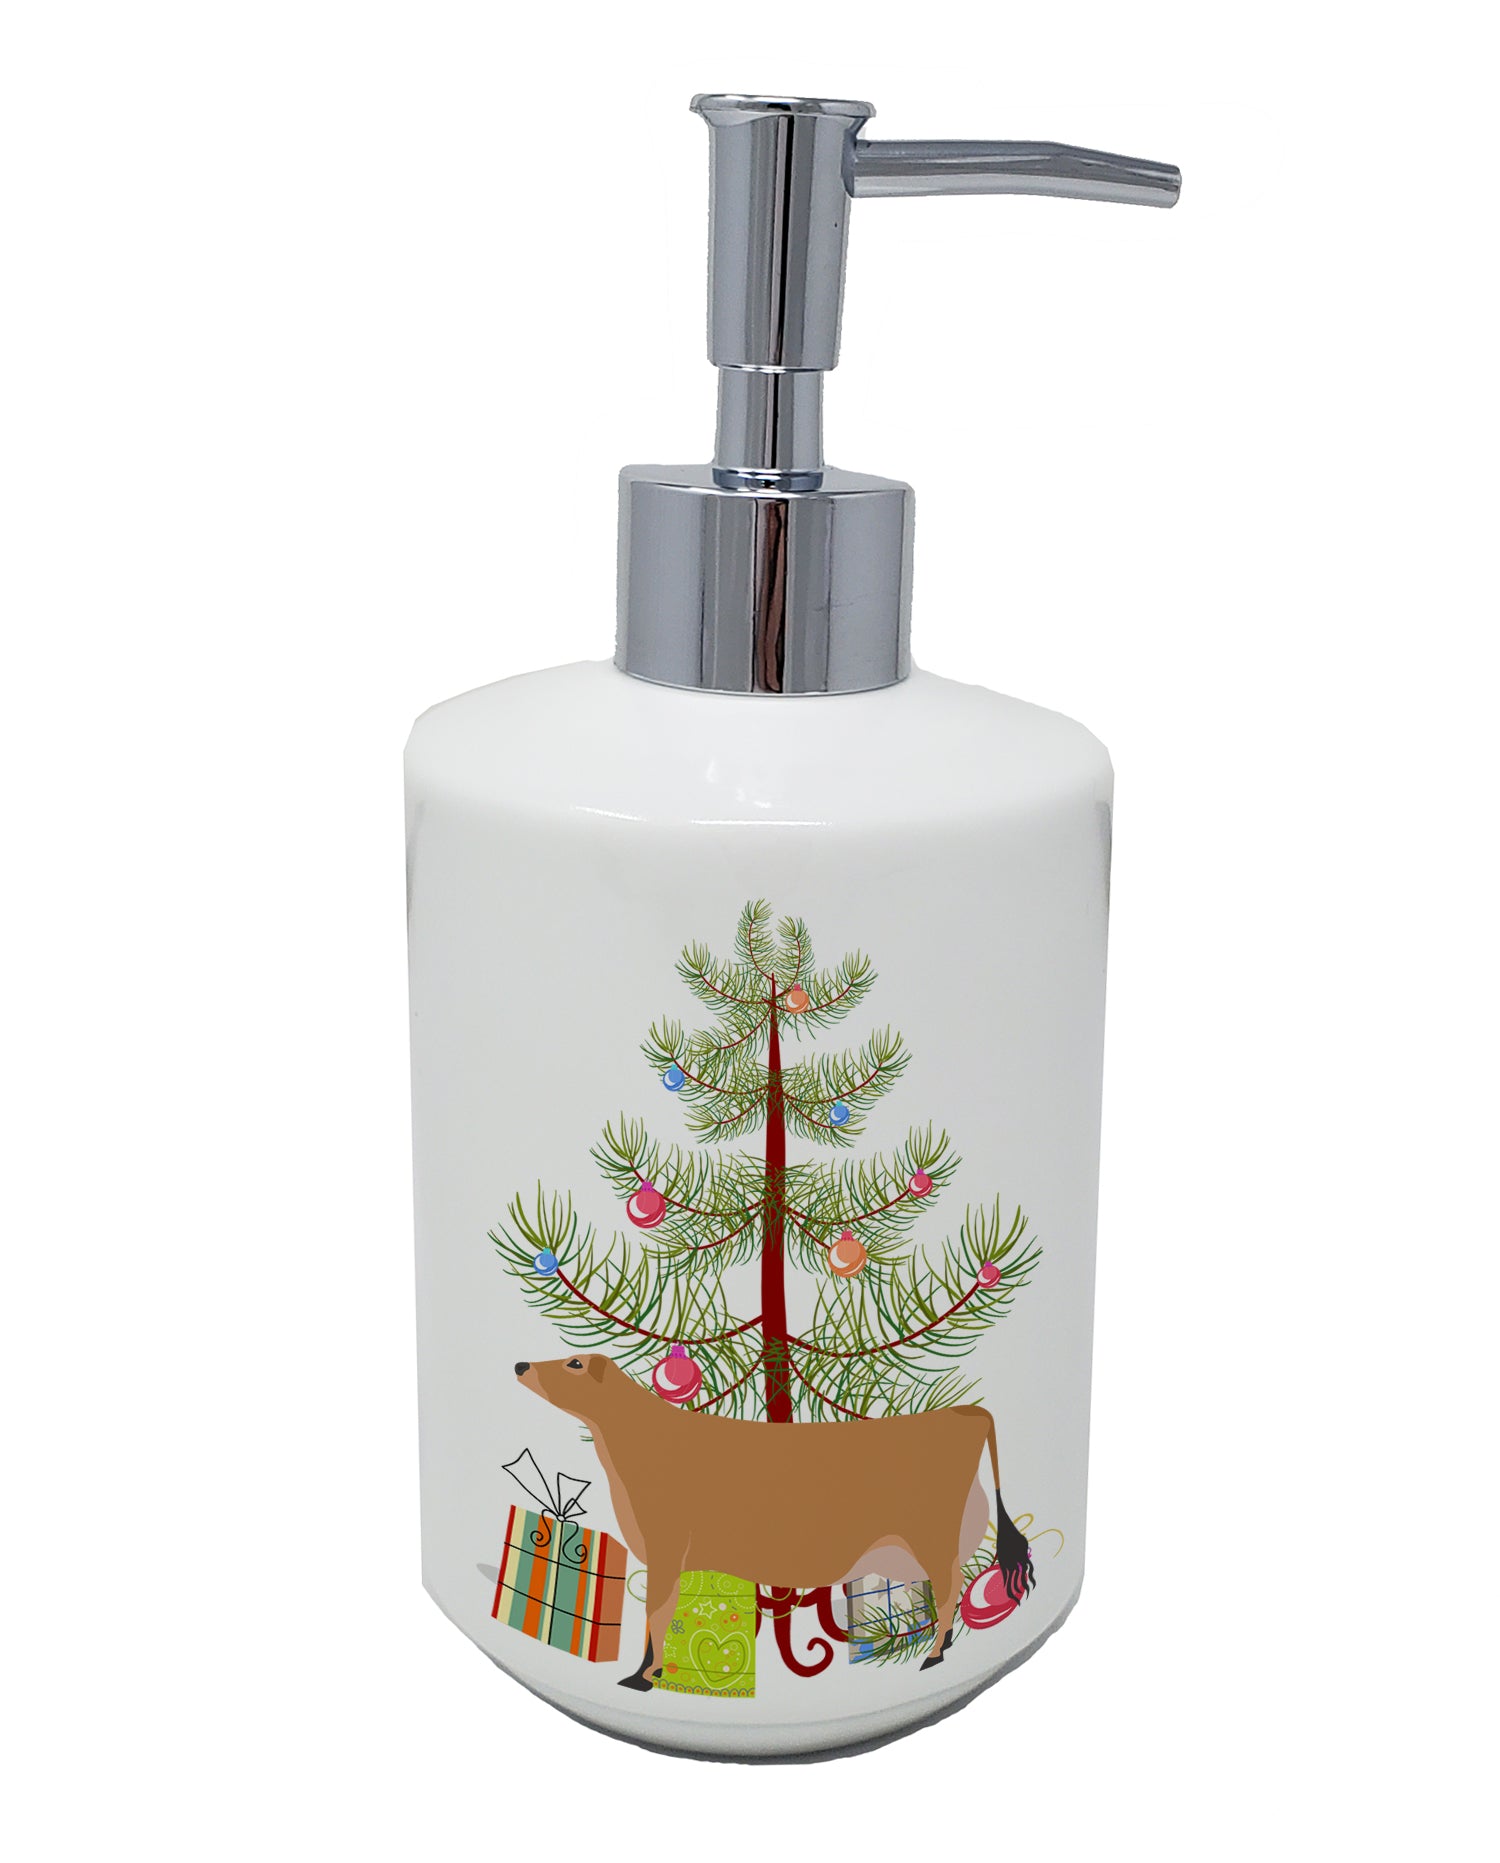 Buy this Jersey Cow Christmas Ceramic Soap Dispenser